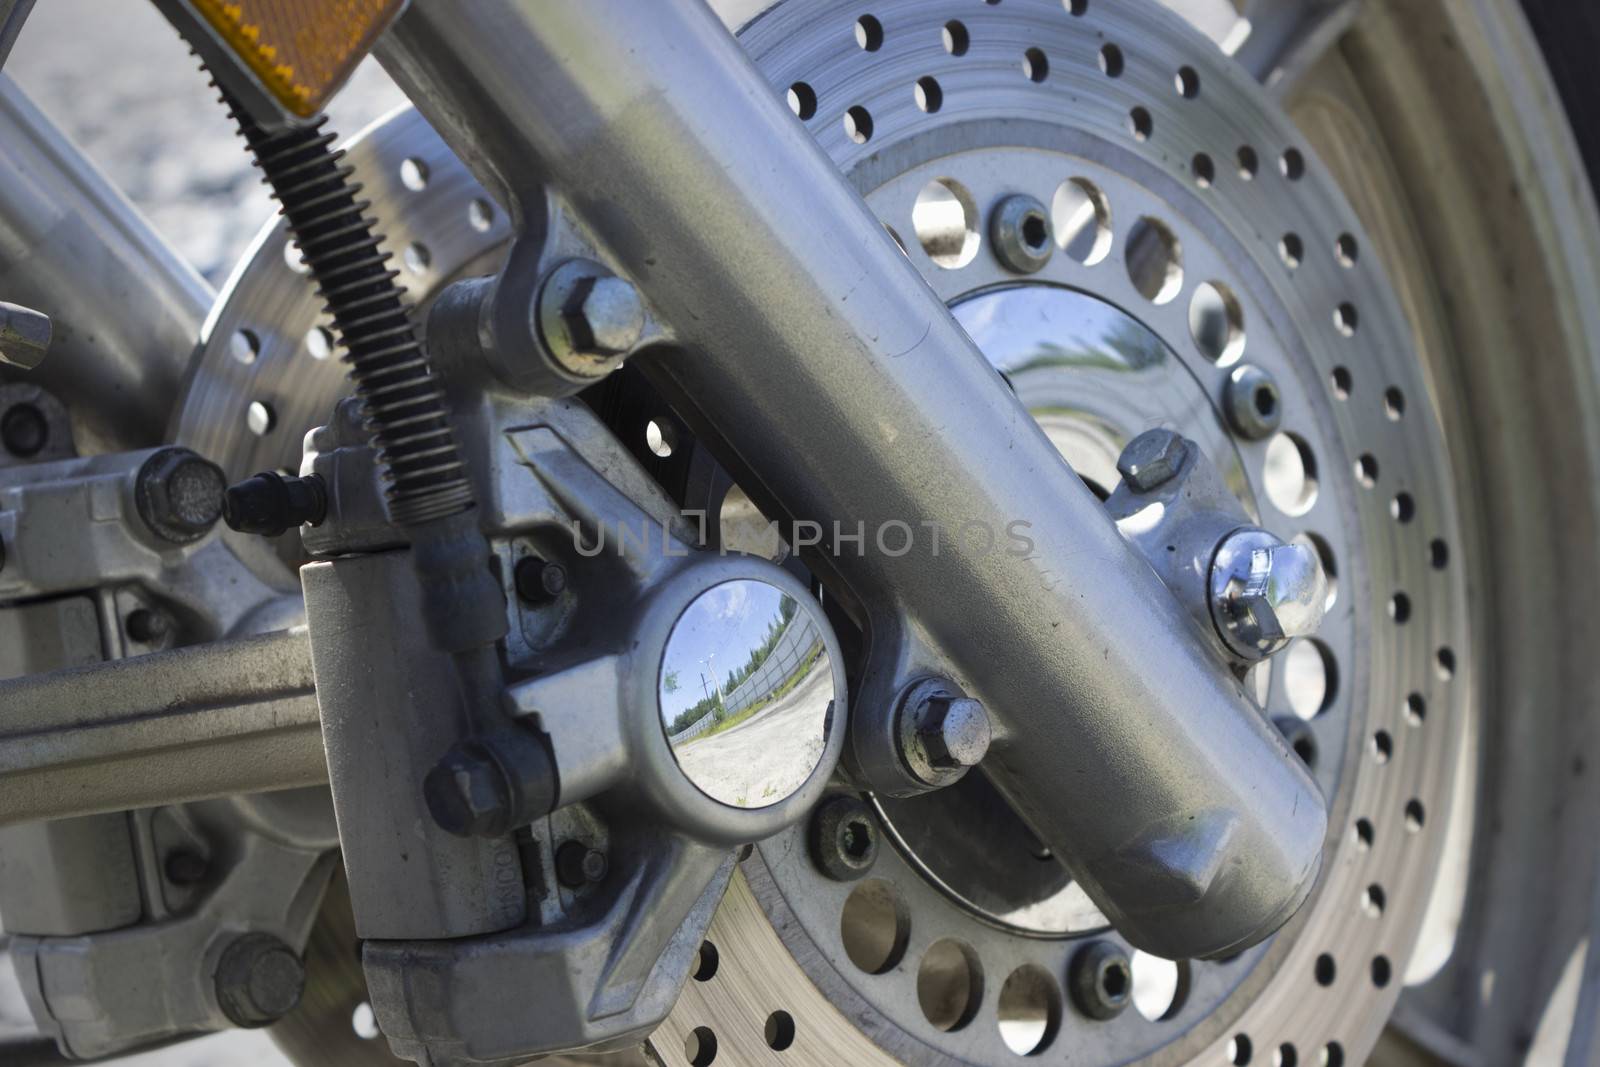 Brake device front-wheel motorcycle on closer inspection